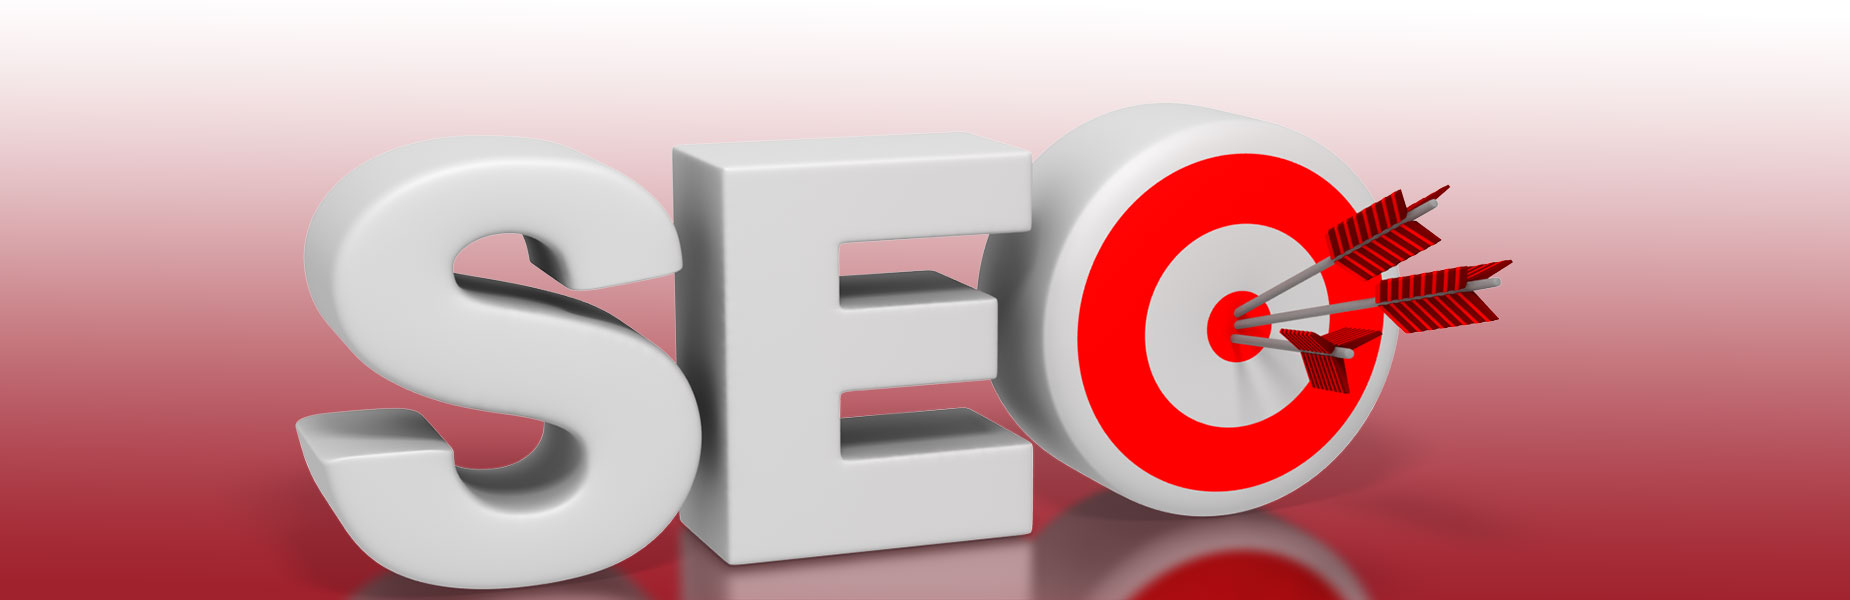 Affordable Calgary Web - experienced SEO specialist helping you rank highly in internet searches!